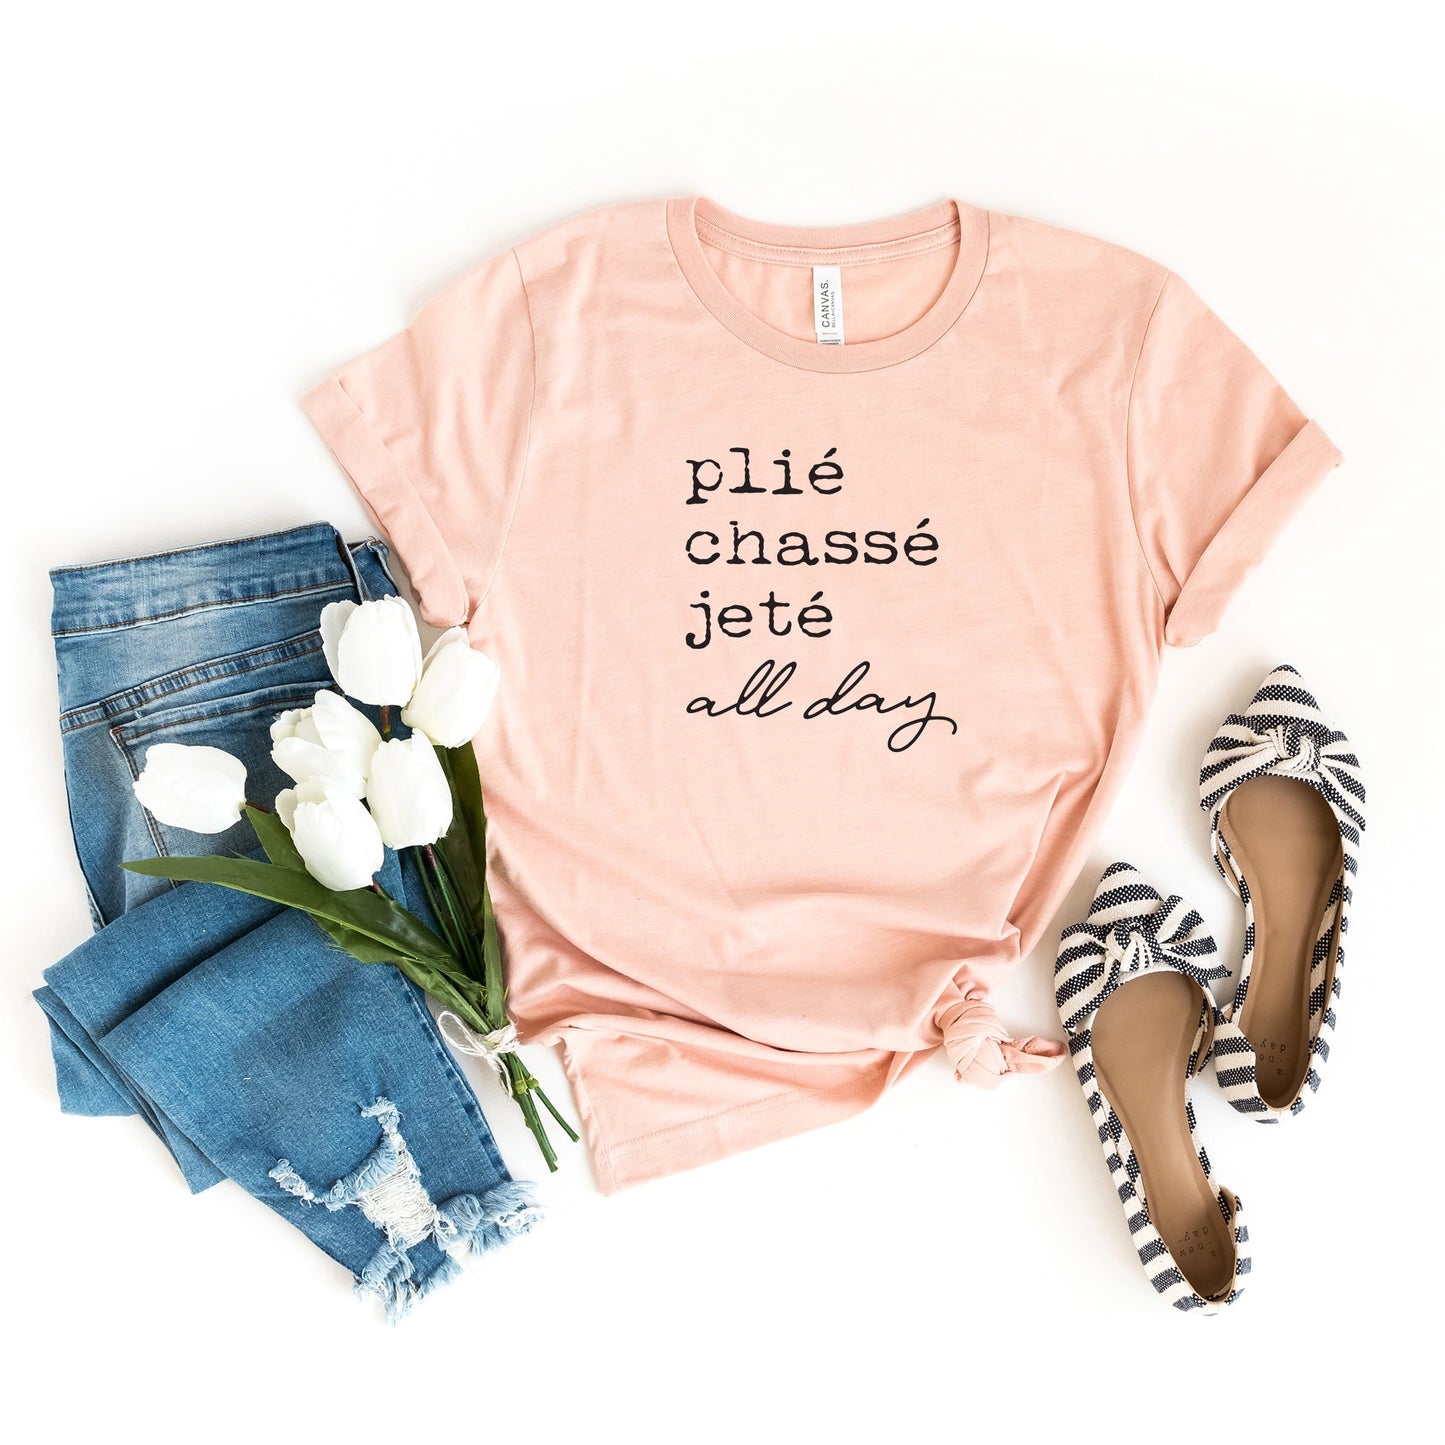 Plie Chasse Jete All Day | Short Sleeve Crew Neck